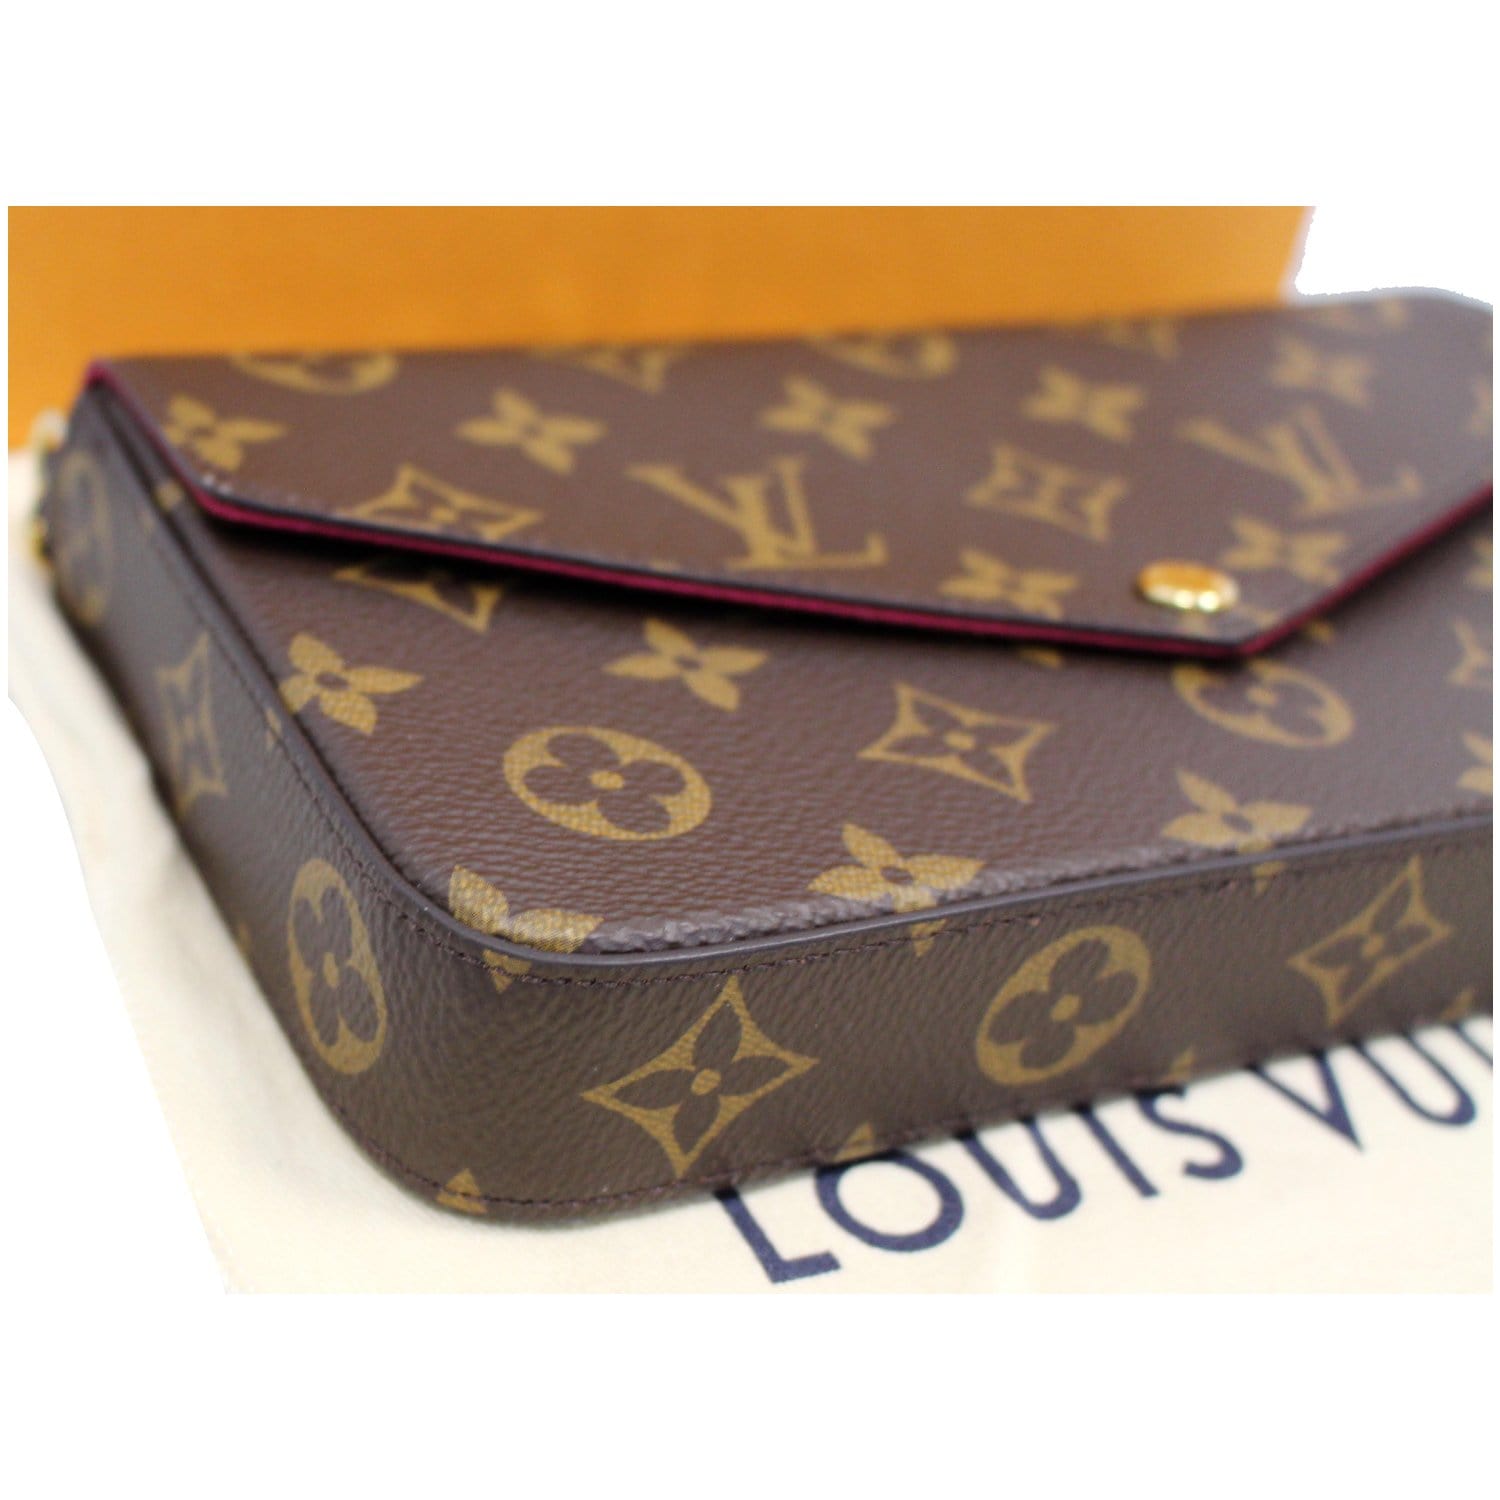 LV Pochette Métis (M46302), Gallery posted by Felicia Ng